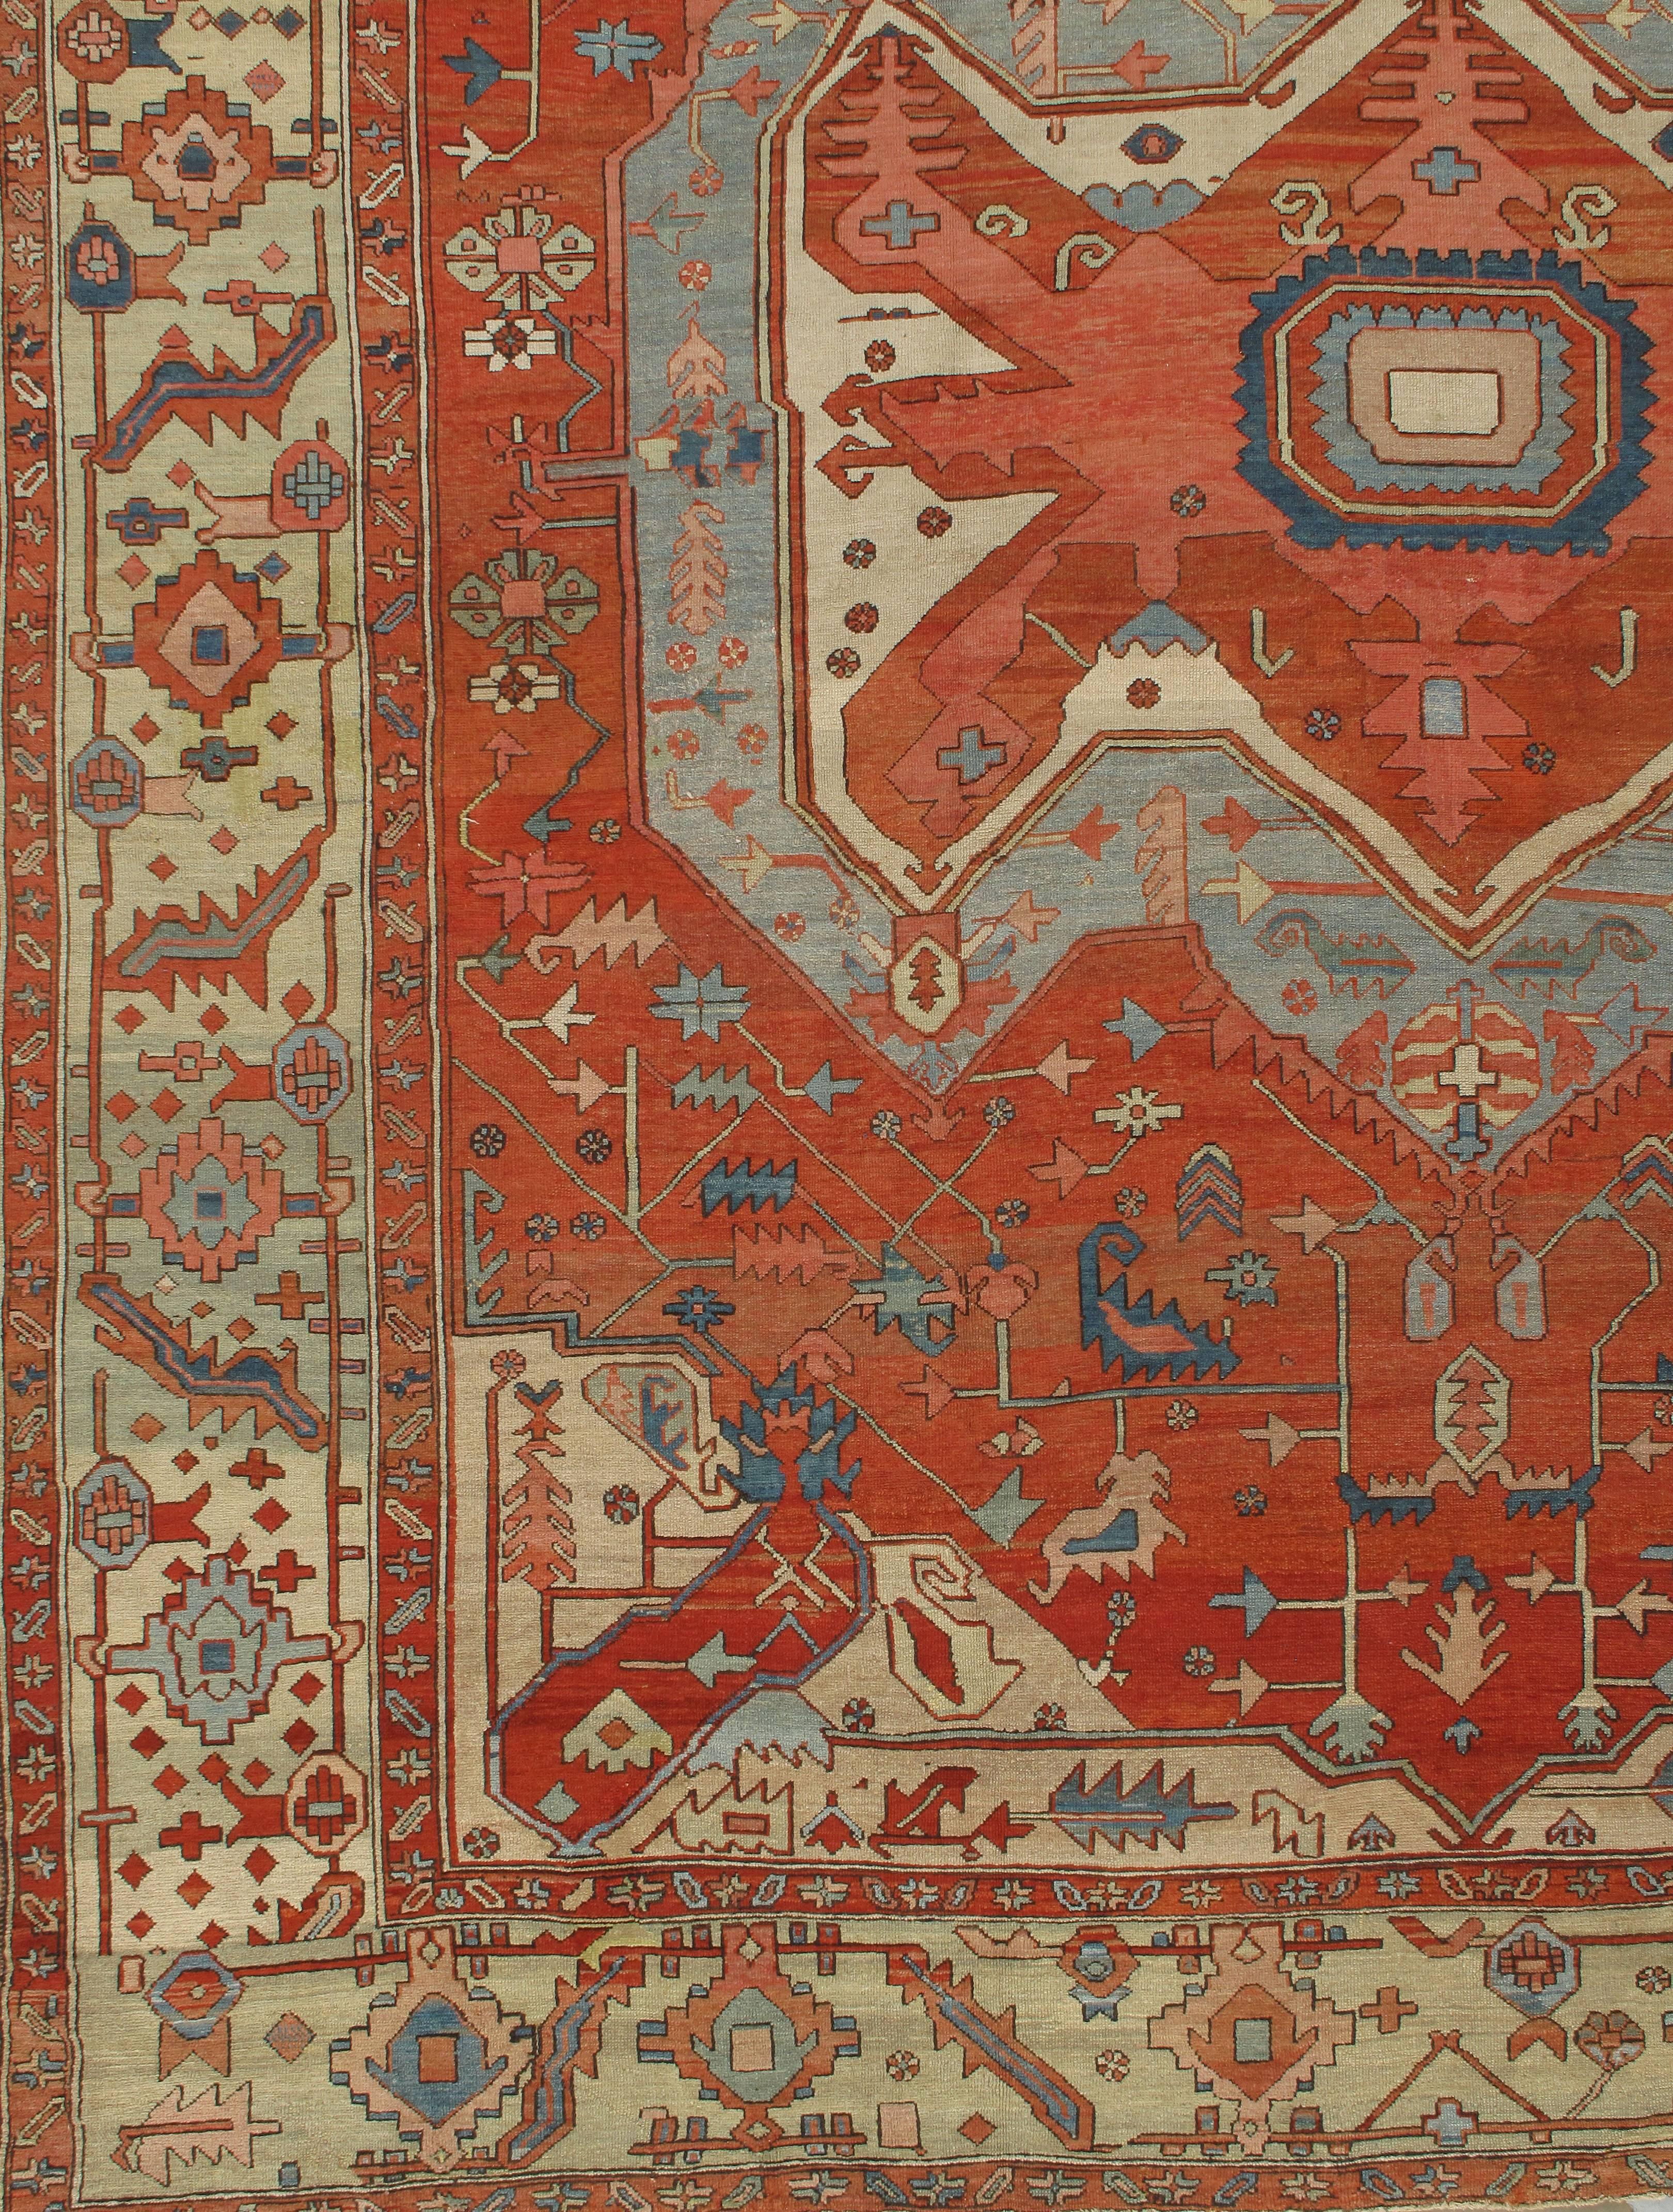 Antique Heriz Serapi rug, circa 1890, 11'5 x 14'4. This carpet is a Fine example of the eccentric and imaginative Serapi quality Heriz carpets woven at the end of the 19th century. The attractive madder red field has lobate corner extensions and